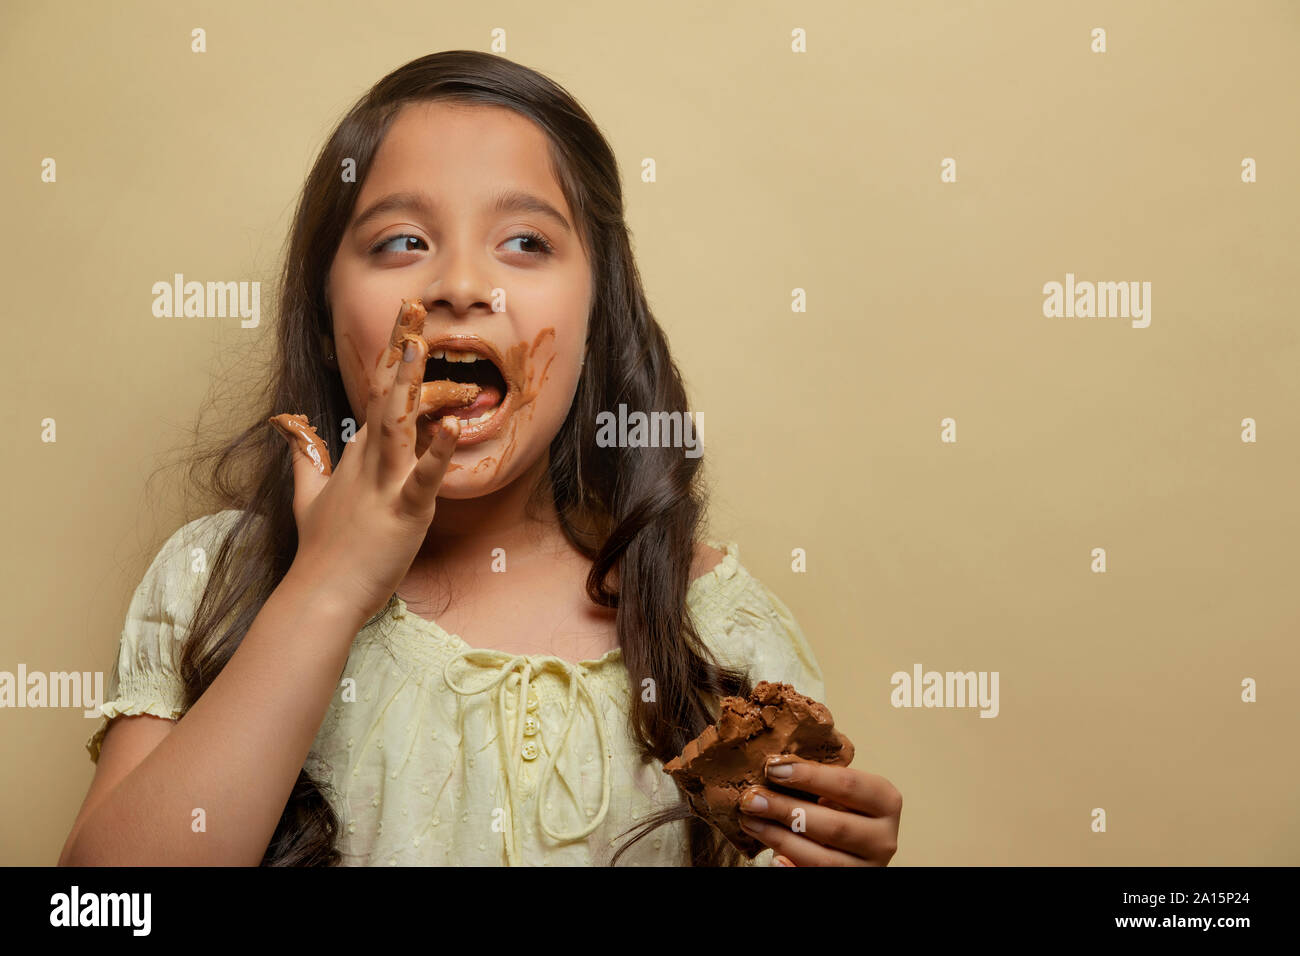 Girl licking chocolate from fingers holding a chocolate bar in the other hand looking away Stock Photo